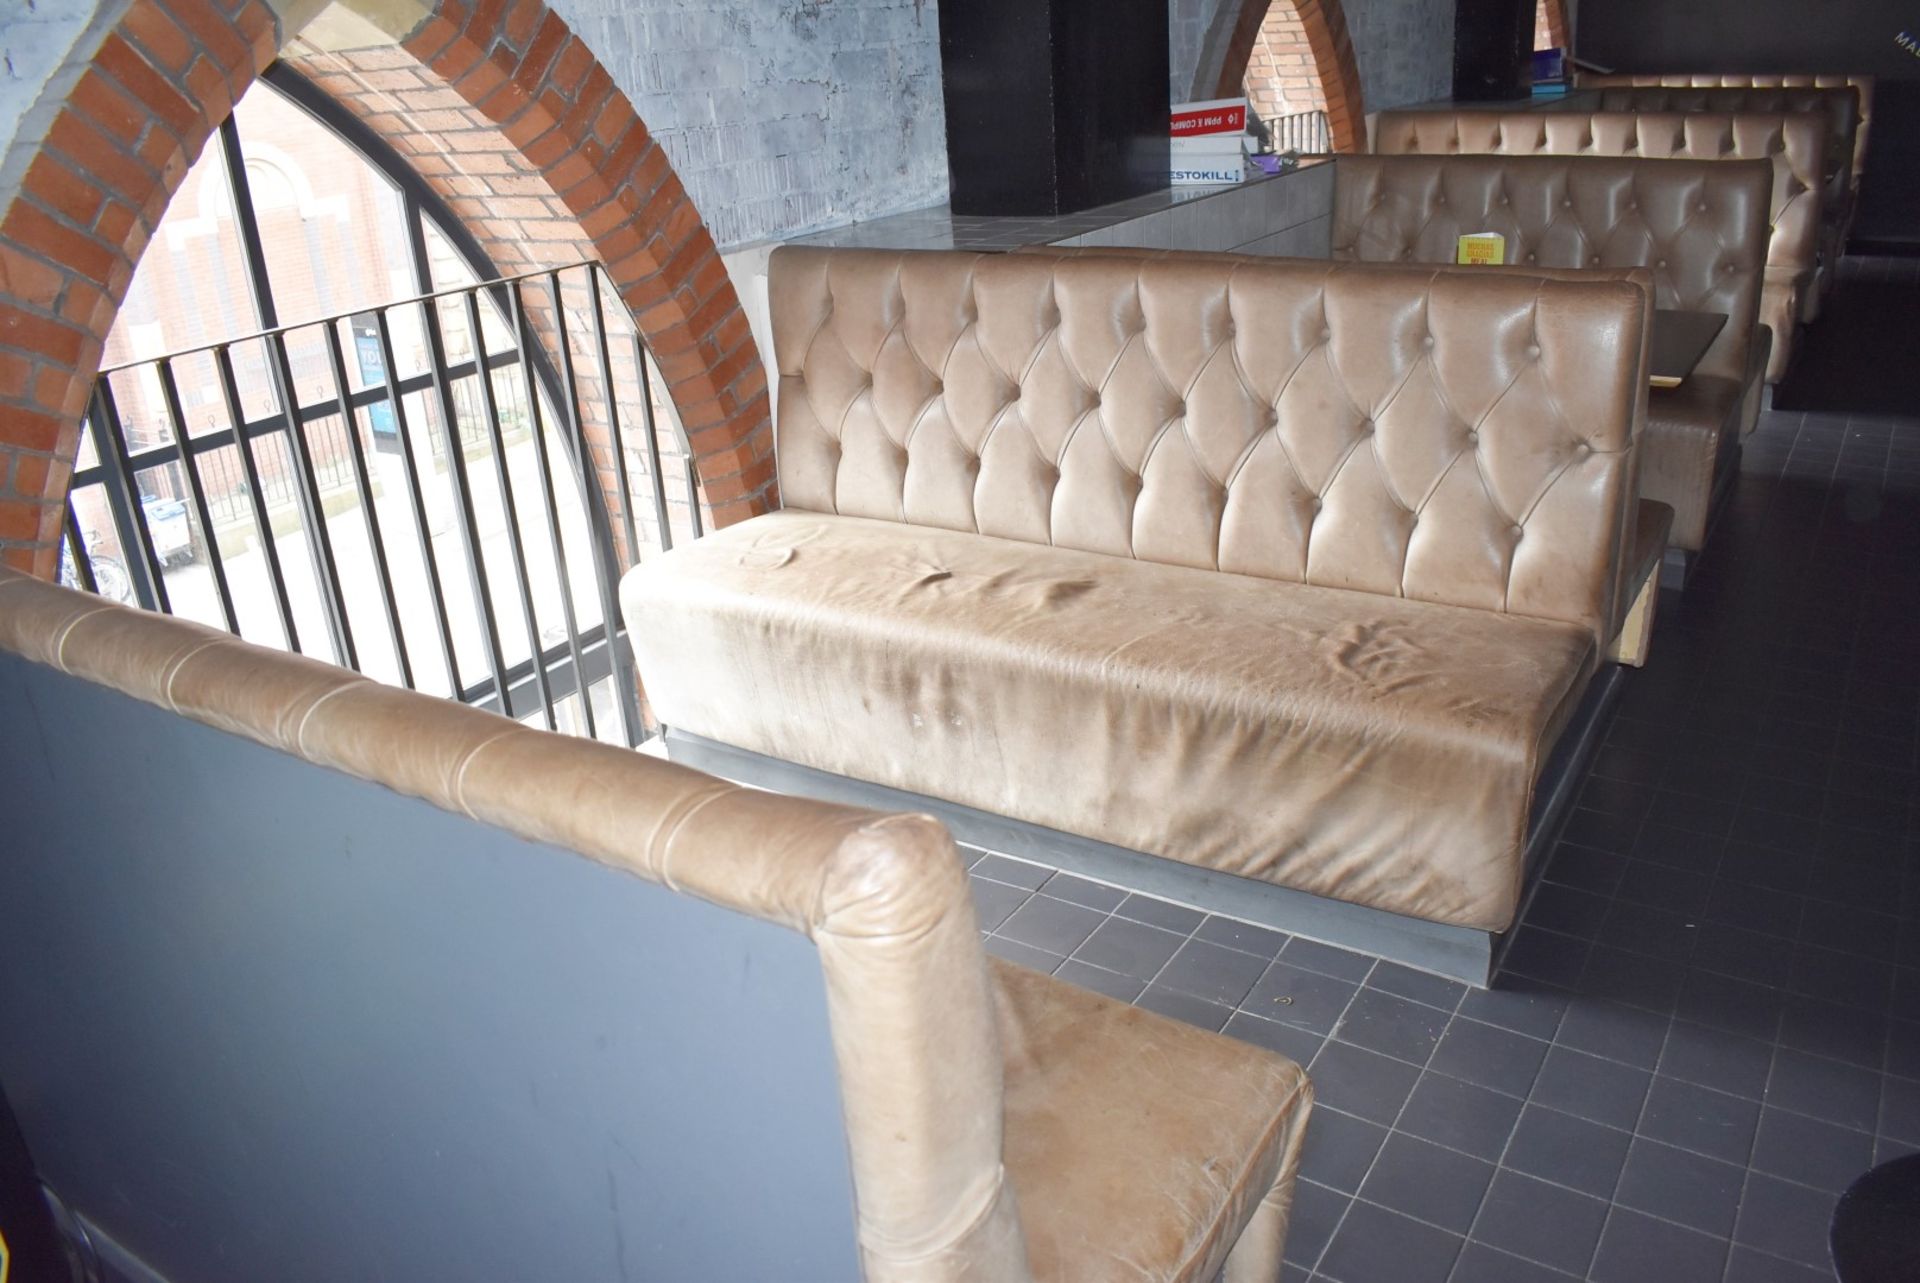 1 x Collection of Restaurant Seating Benches With Brown Leather Upholstery and Studded Backs - Image 15 of 26